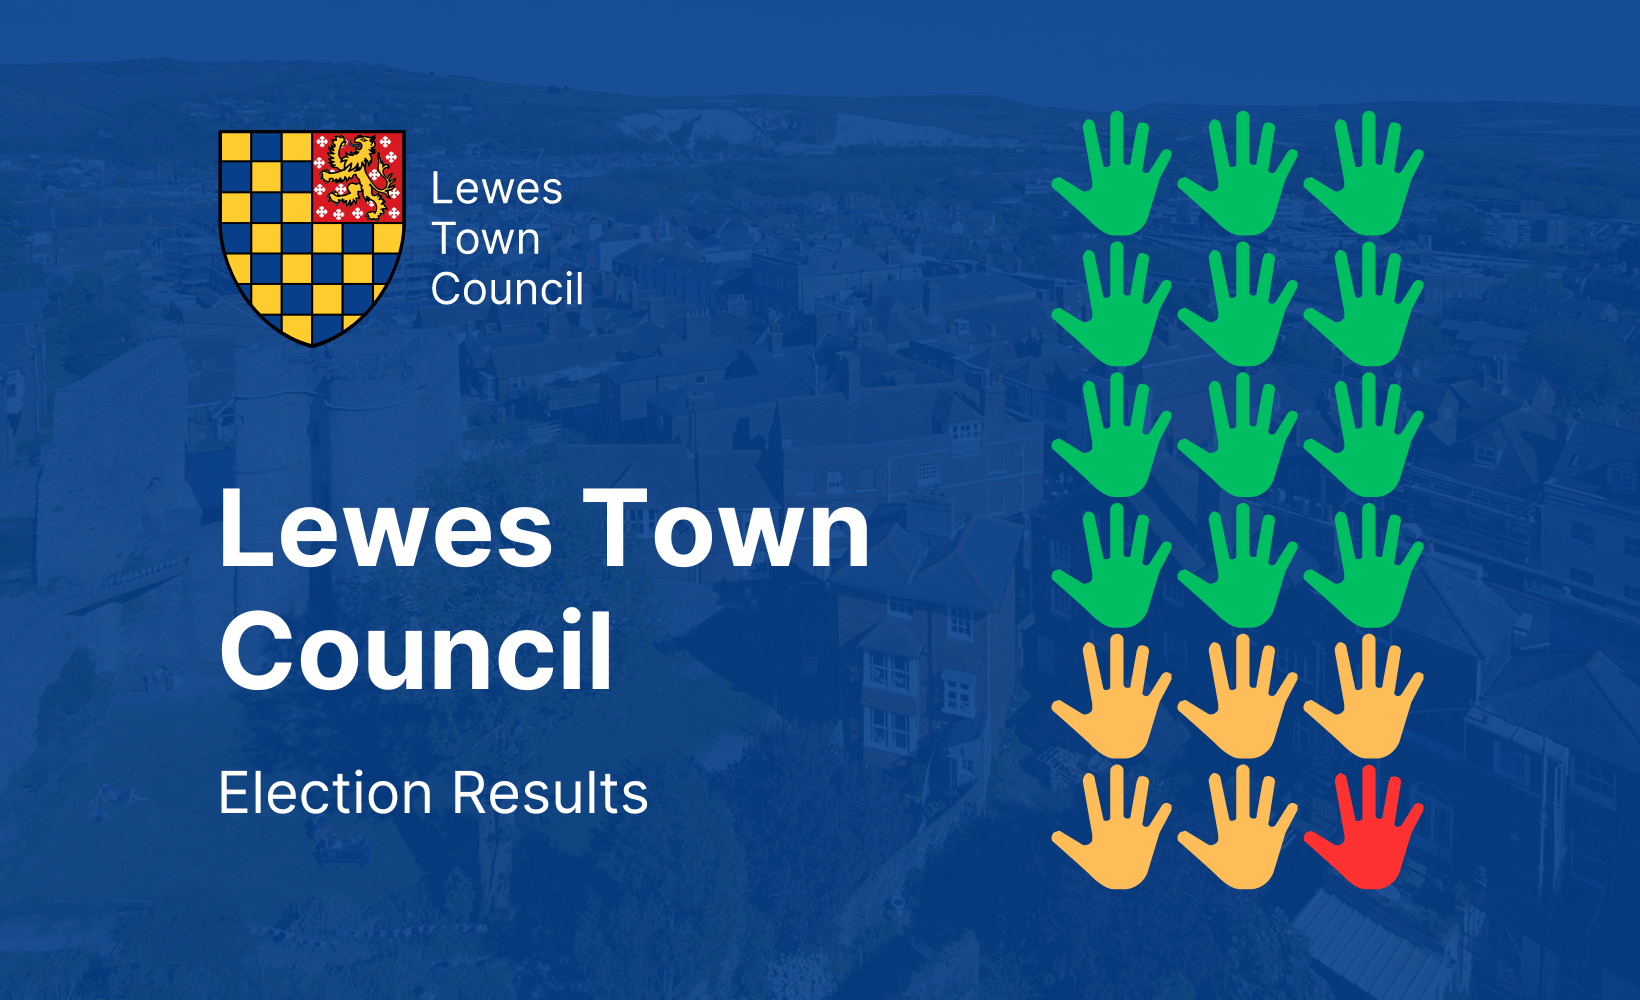 Lewes Town Council Election Results. Infographic showing 12 green hand icons, 5 orange hand icons and 1 red hand icon, representing the numbers of Town Council seats won by the Green Party, Liberal Democrats and the Labour Party.